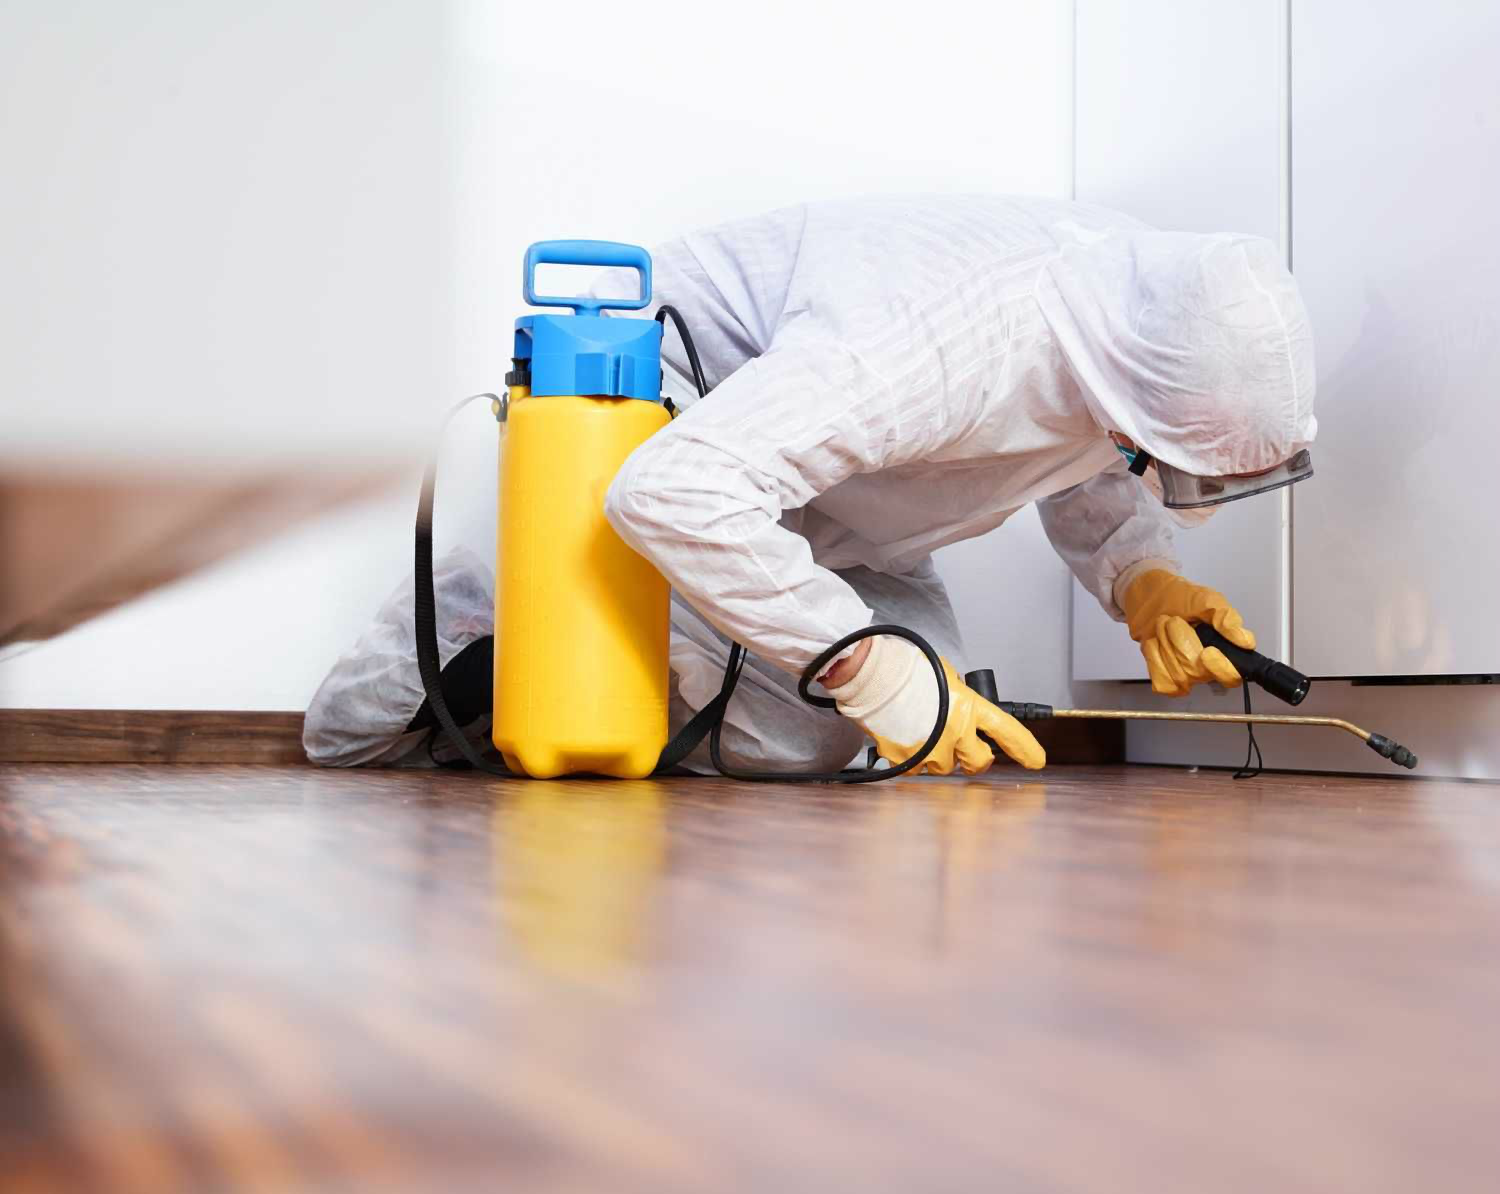 Choosing the Right Pest Control Services: Factors to Consider for Effective Solutions